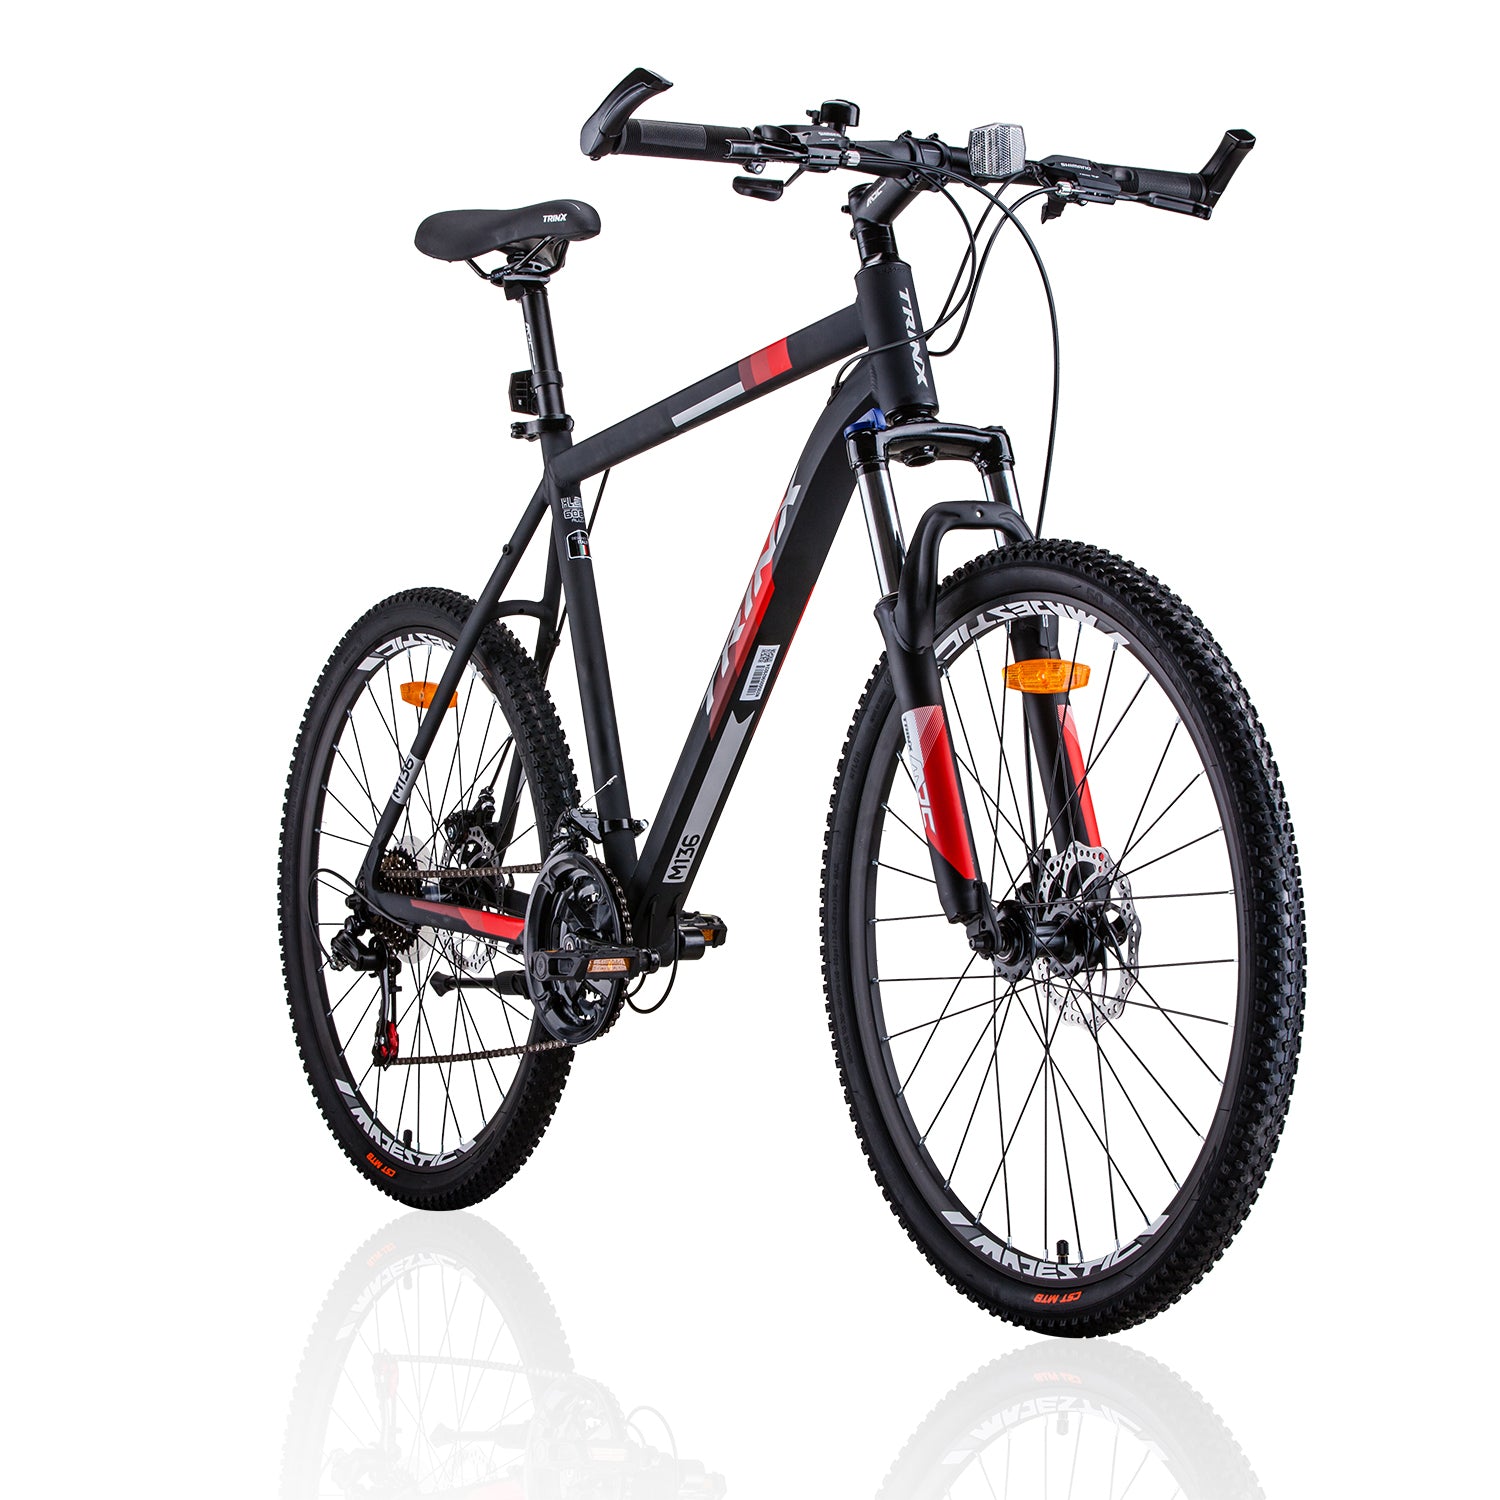 Trinx MTB Mens Mountain Bike 26 inch Shimano Gear 21-Speed [Colour: Matt Black White/Red] [Size Of Frame: 17 inches]